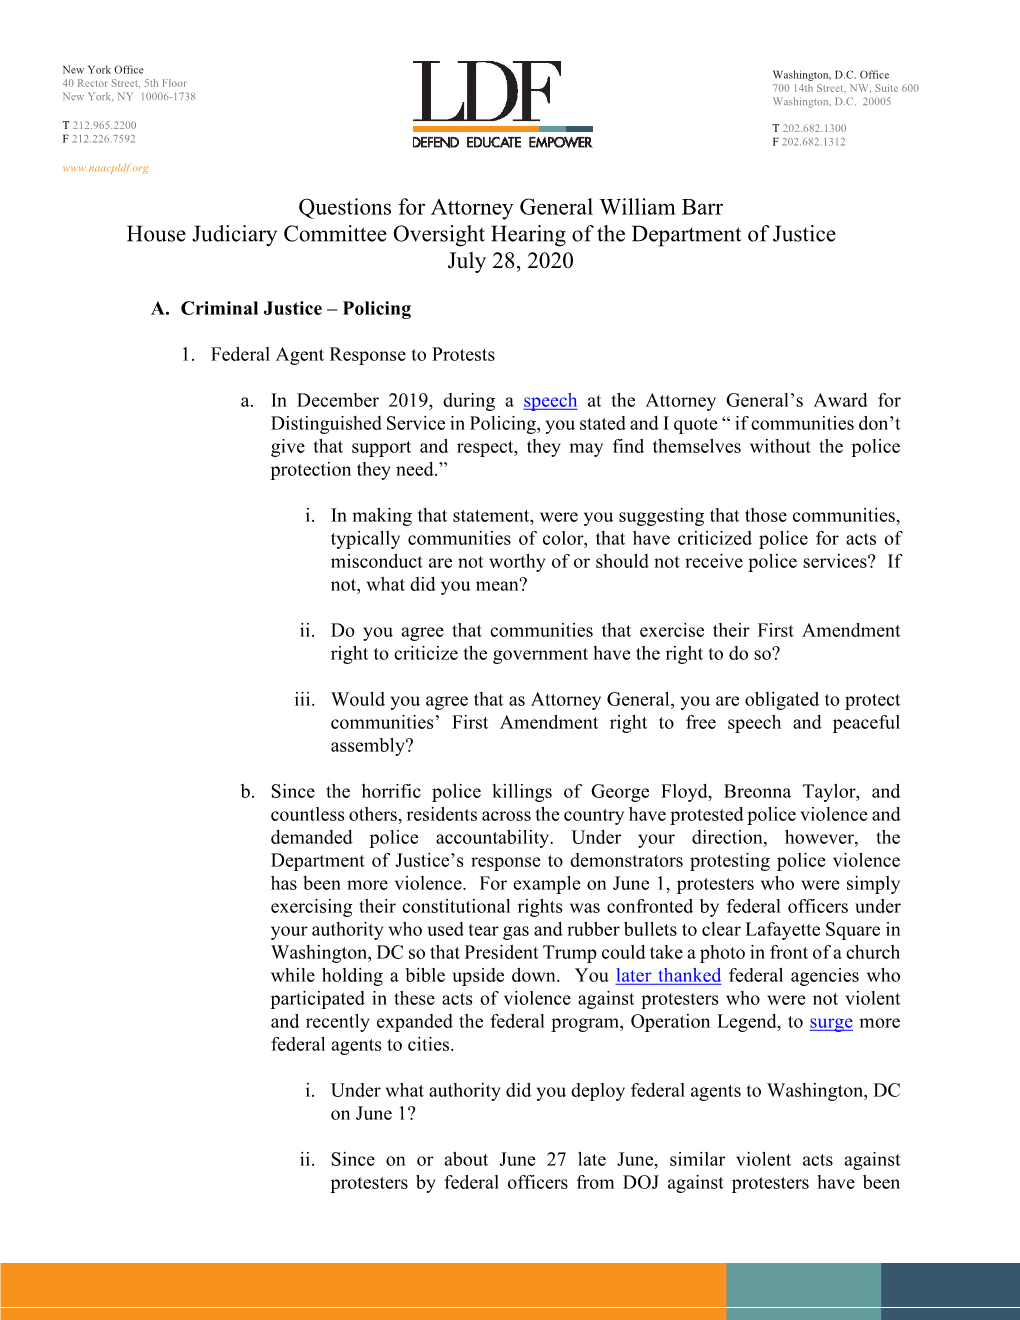 Questions for Attorney General William Barr House Judiciary Committee Oversight Hearing of the Department of Justice July 28, 2020